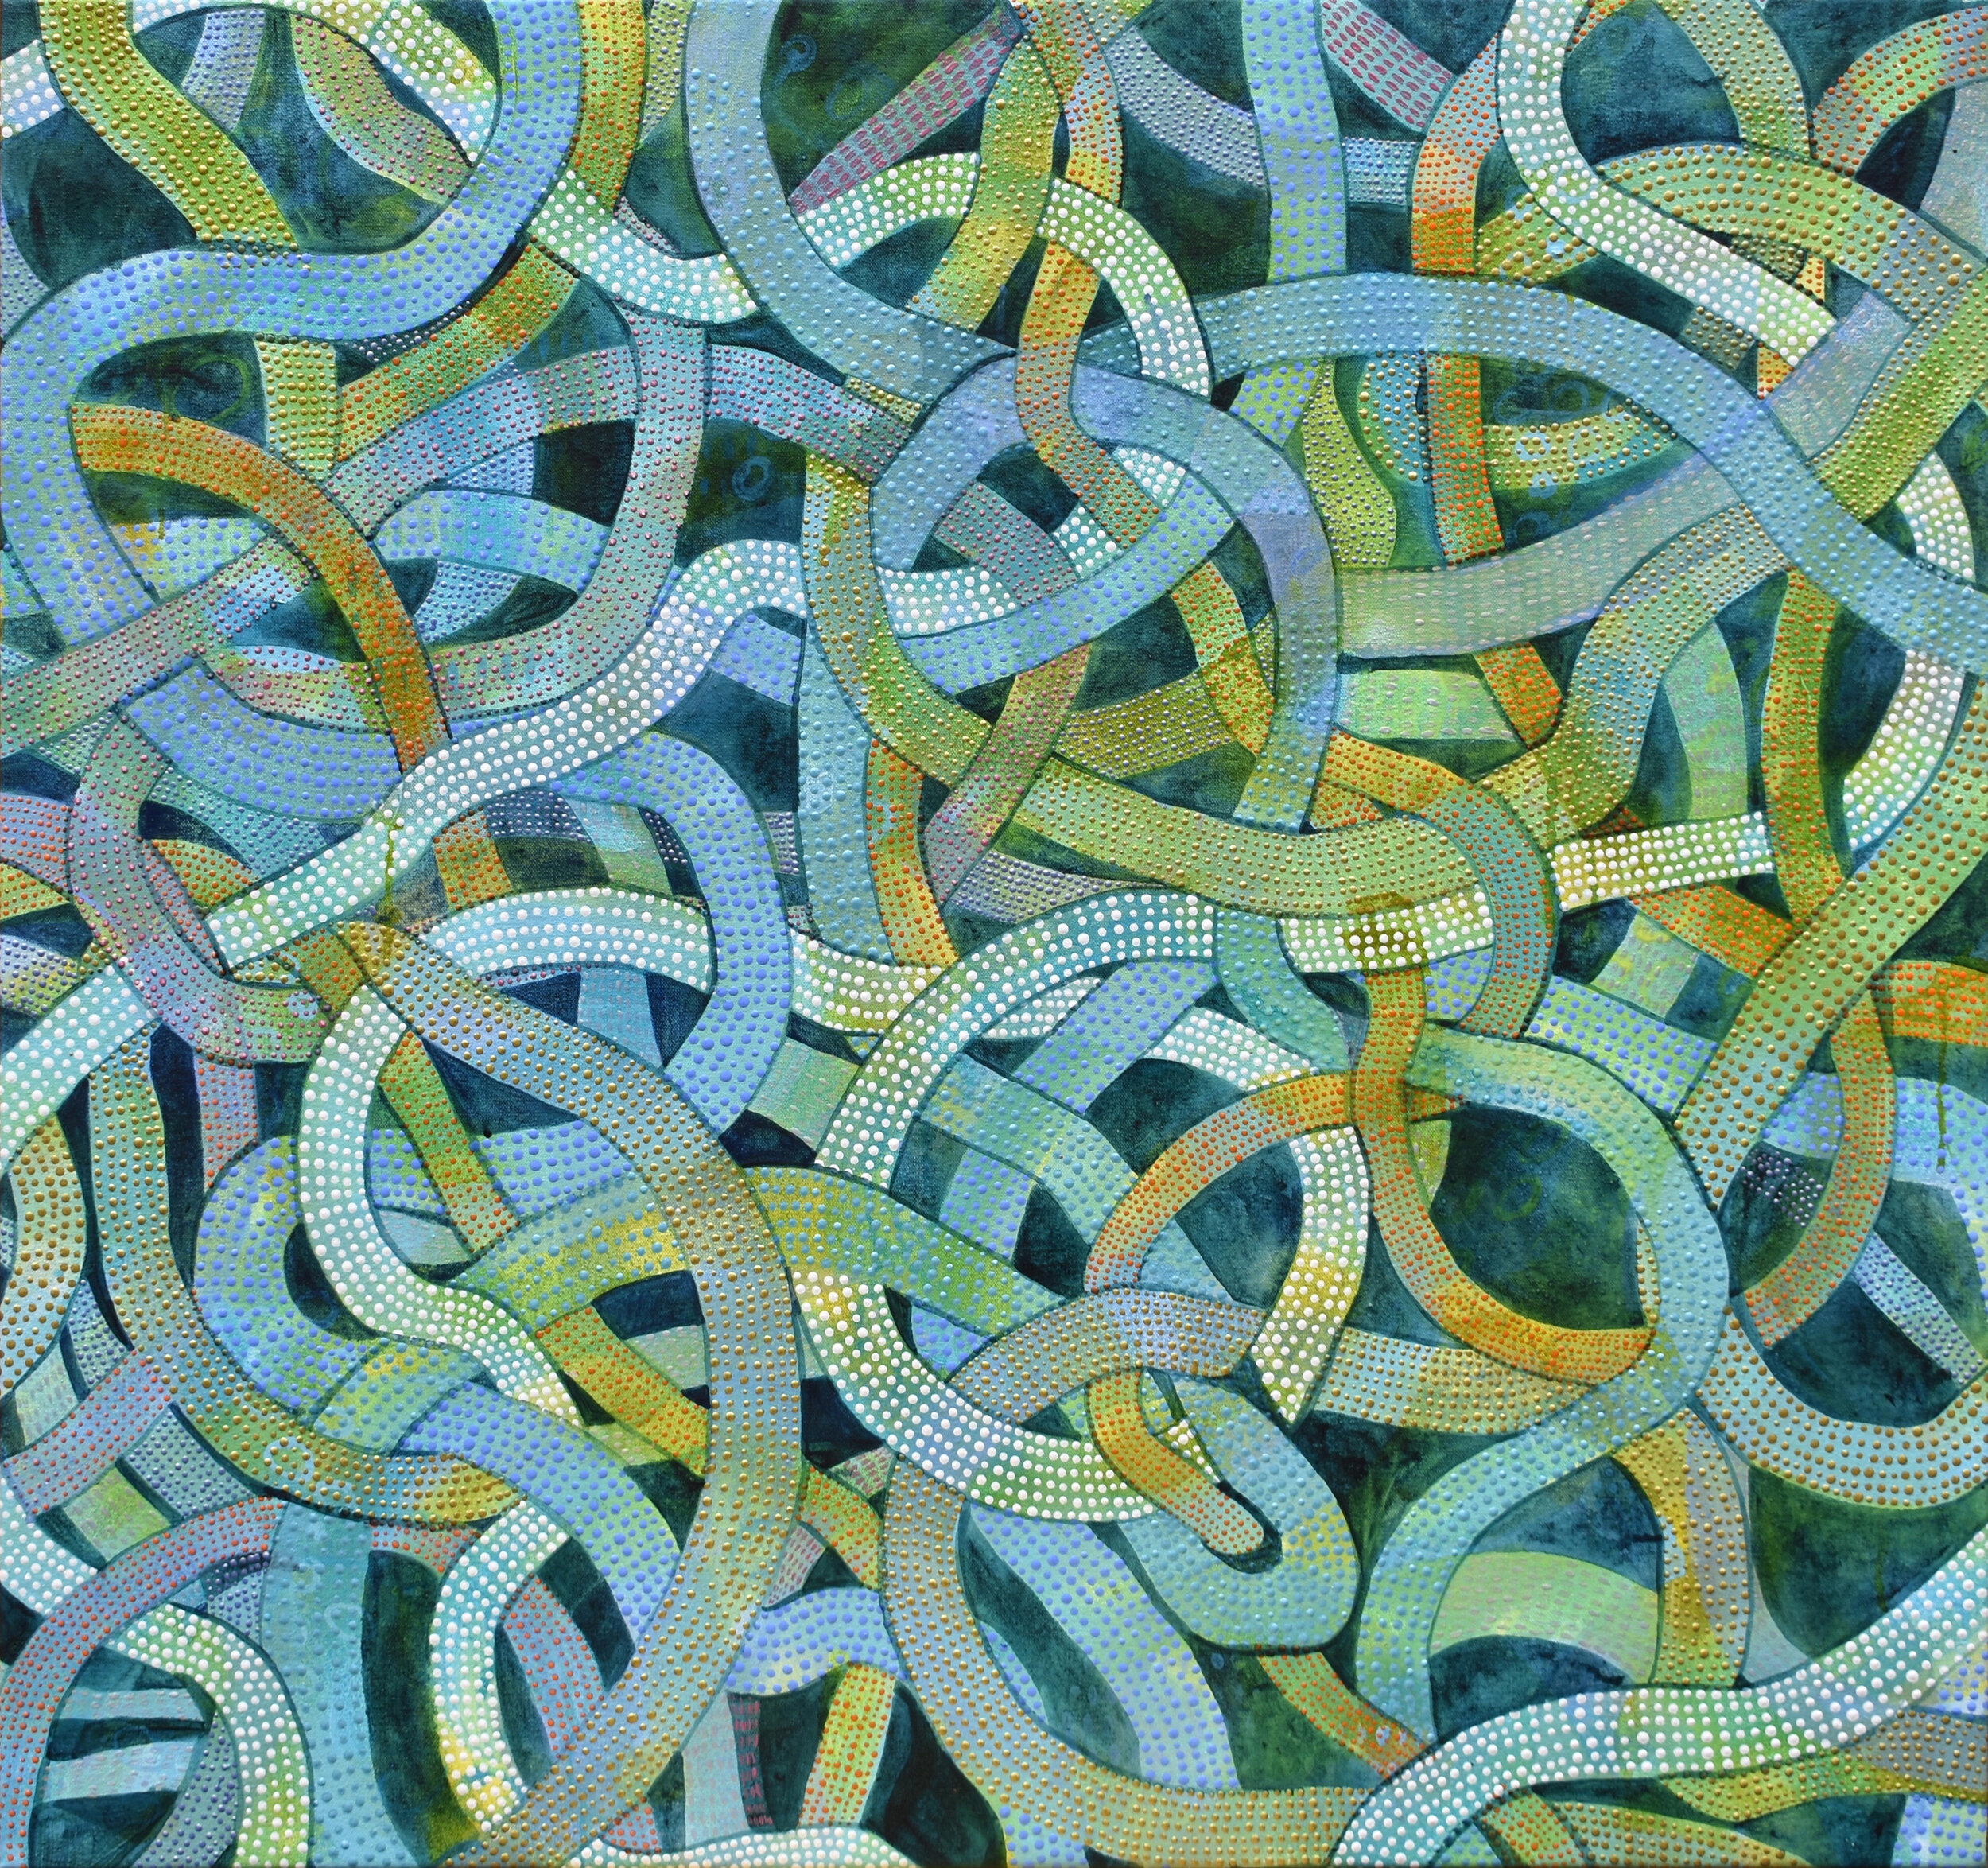  Denise Driscoll,  Tangle 1 , Acrylic on canvas, 34 x 36 